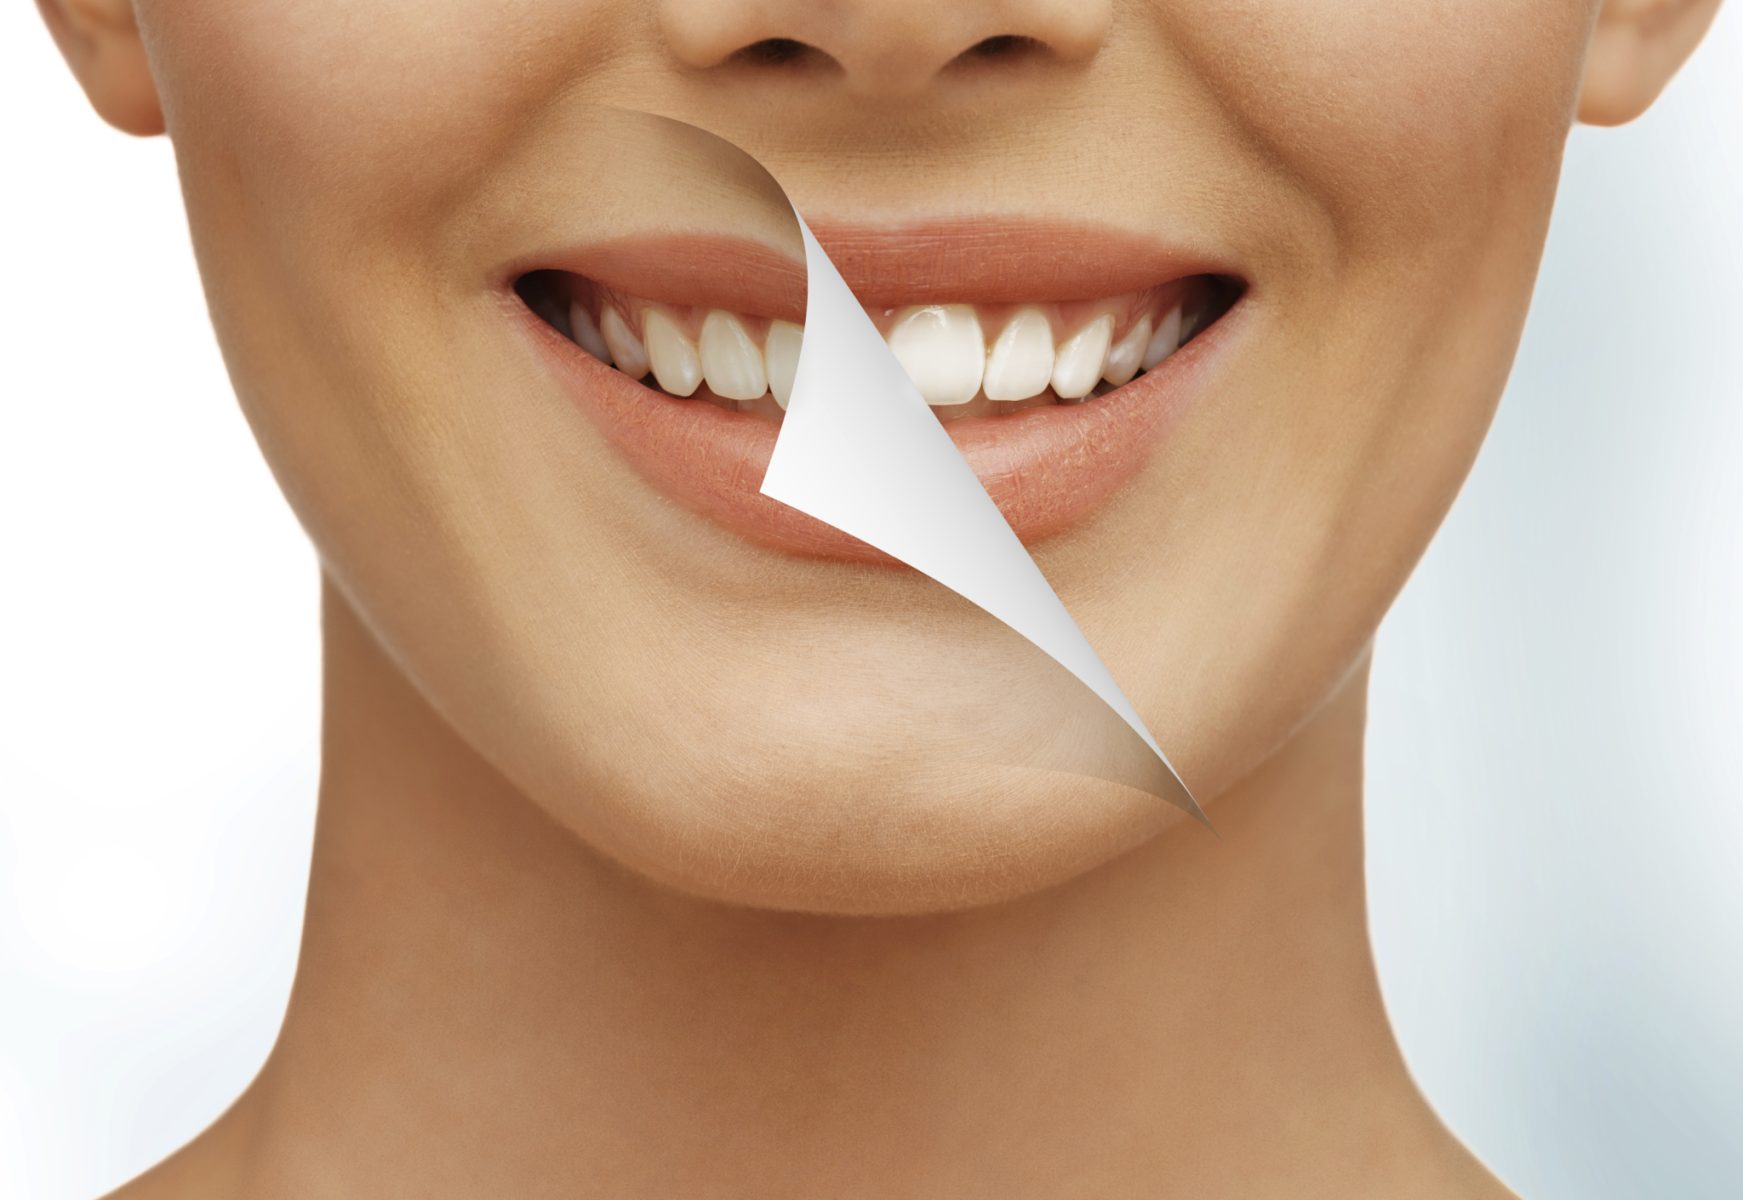 A woman smiling with the page turning to reveal whiter teeth as a result of tooth whitening treatments